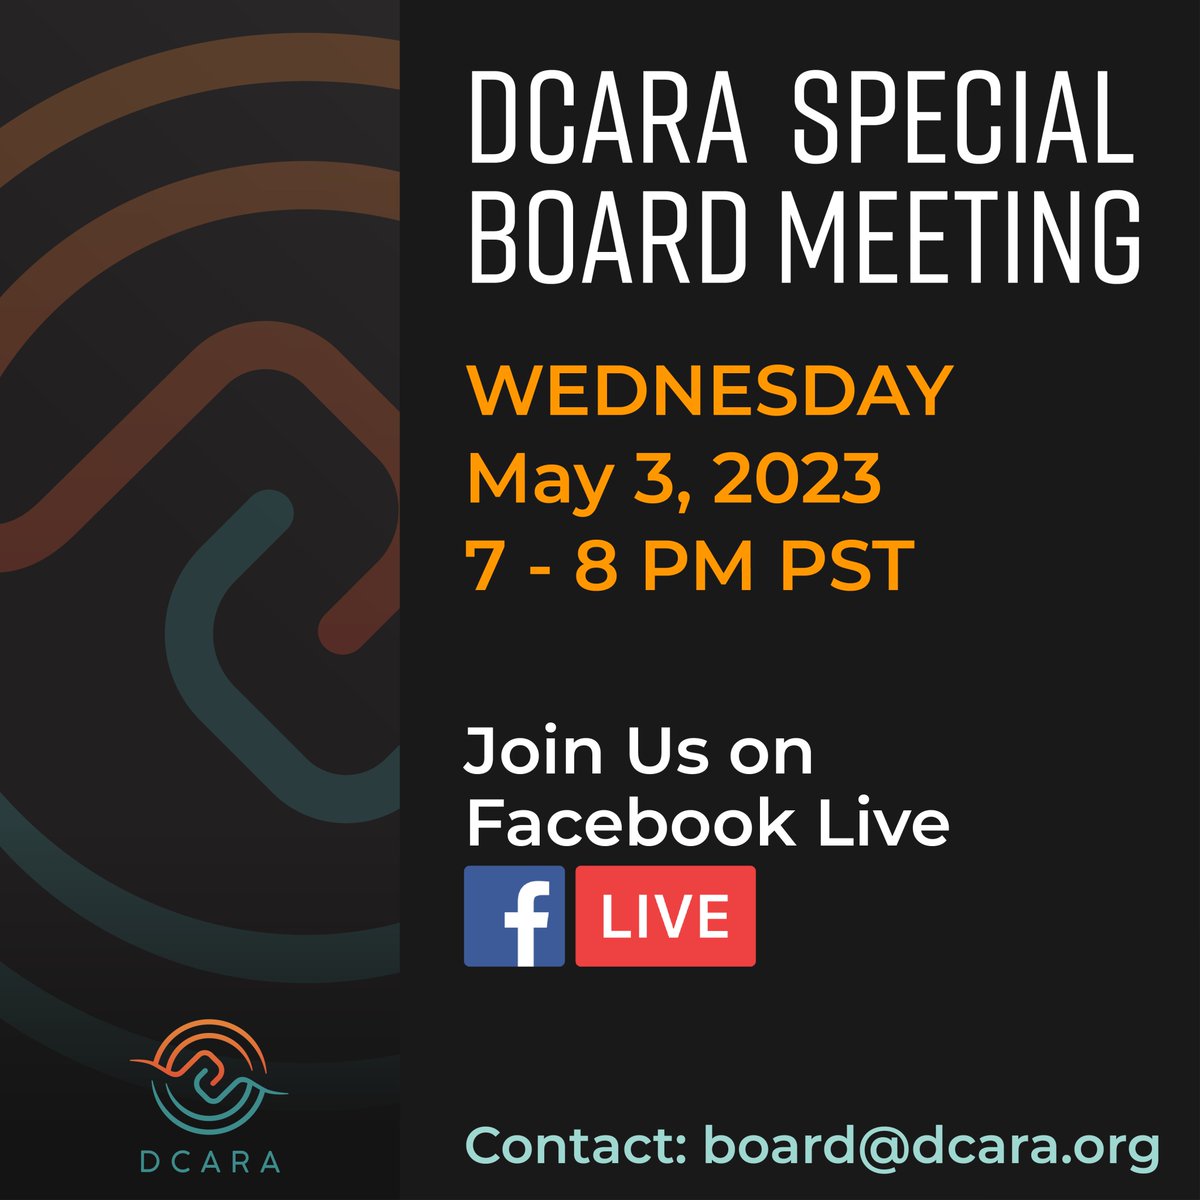 [COMMUNITY ANNOUNCEMENT]

Join us on Facebook Live for a live-streamed DCARA Special Board meeting on Wednesday, May 3, 2023 from 7 - 8pm PST.

To view the agenda, visit dcara.org/about-us/board/

#DCARABoard # DeafCommunity #DCARA1962